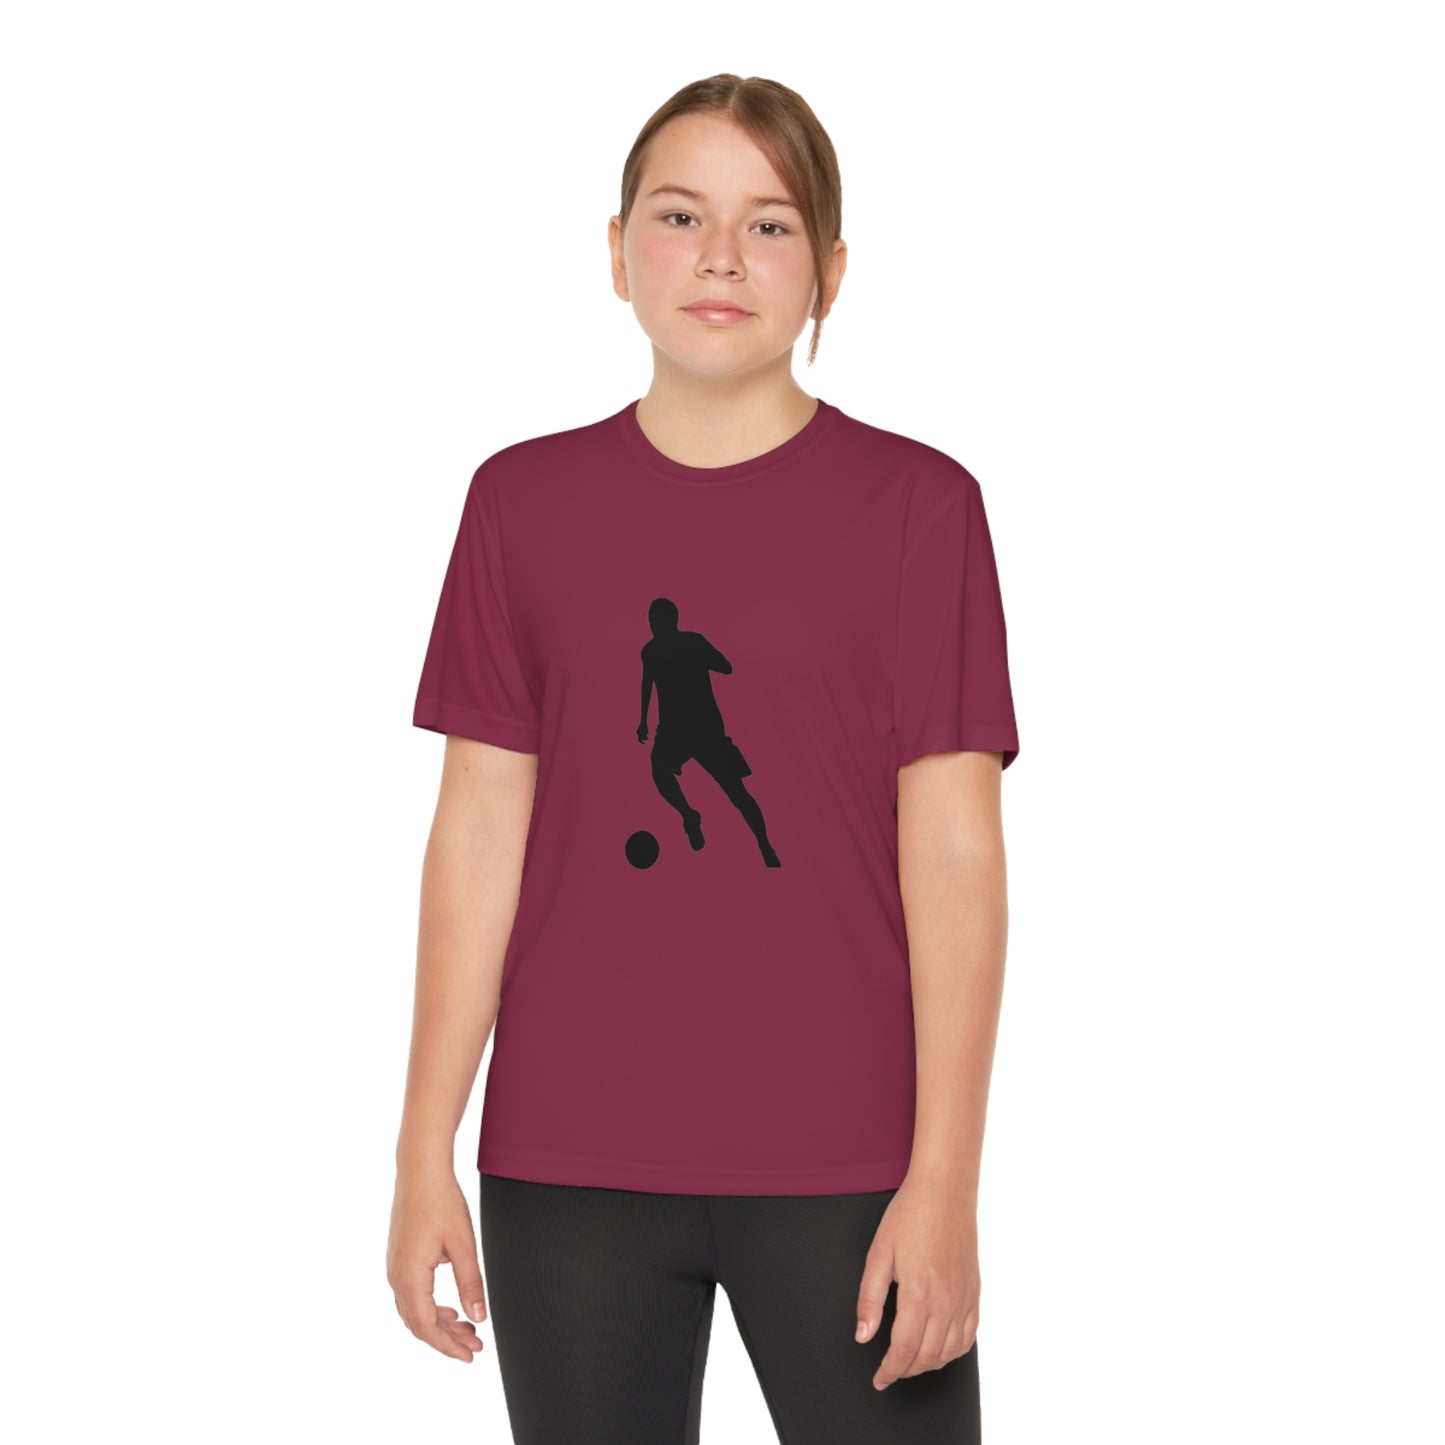 Youth Competitor Tee #2: Soccer